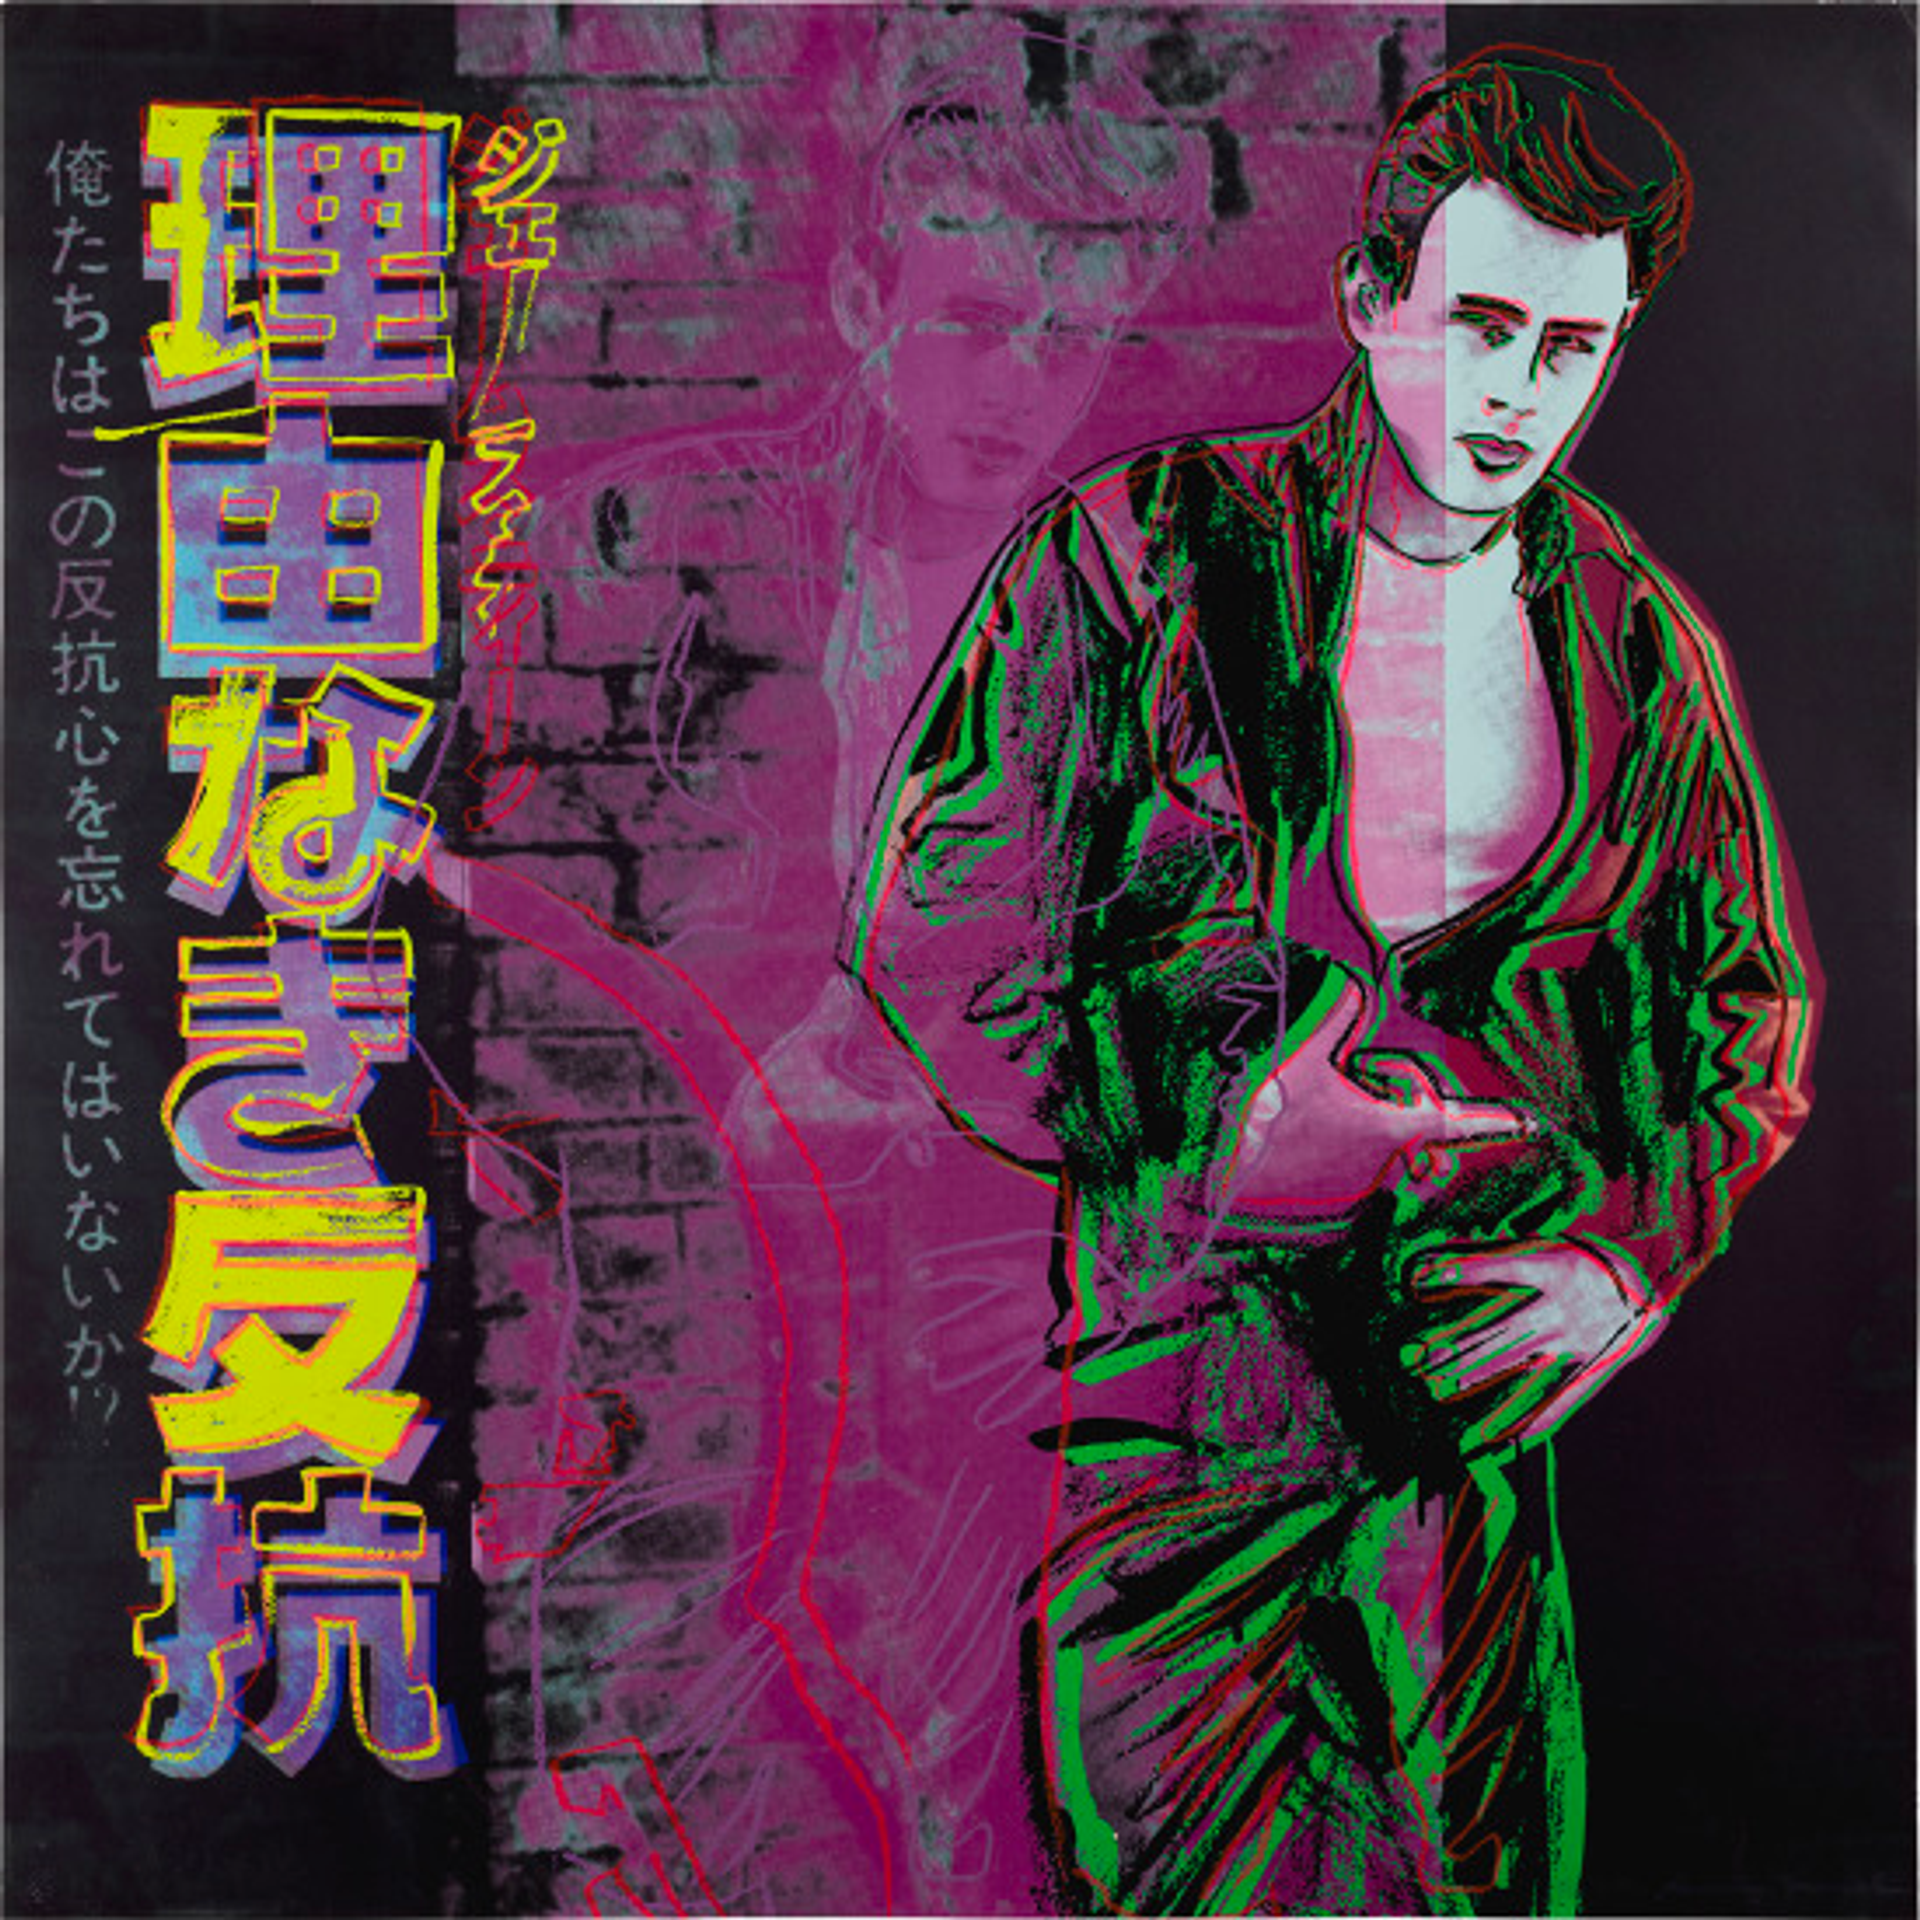 Rebel Without A Cause (James Dean) (F. & S. II.355) by Andy Warhol - MyArtBroker 